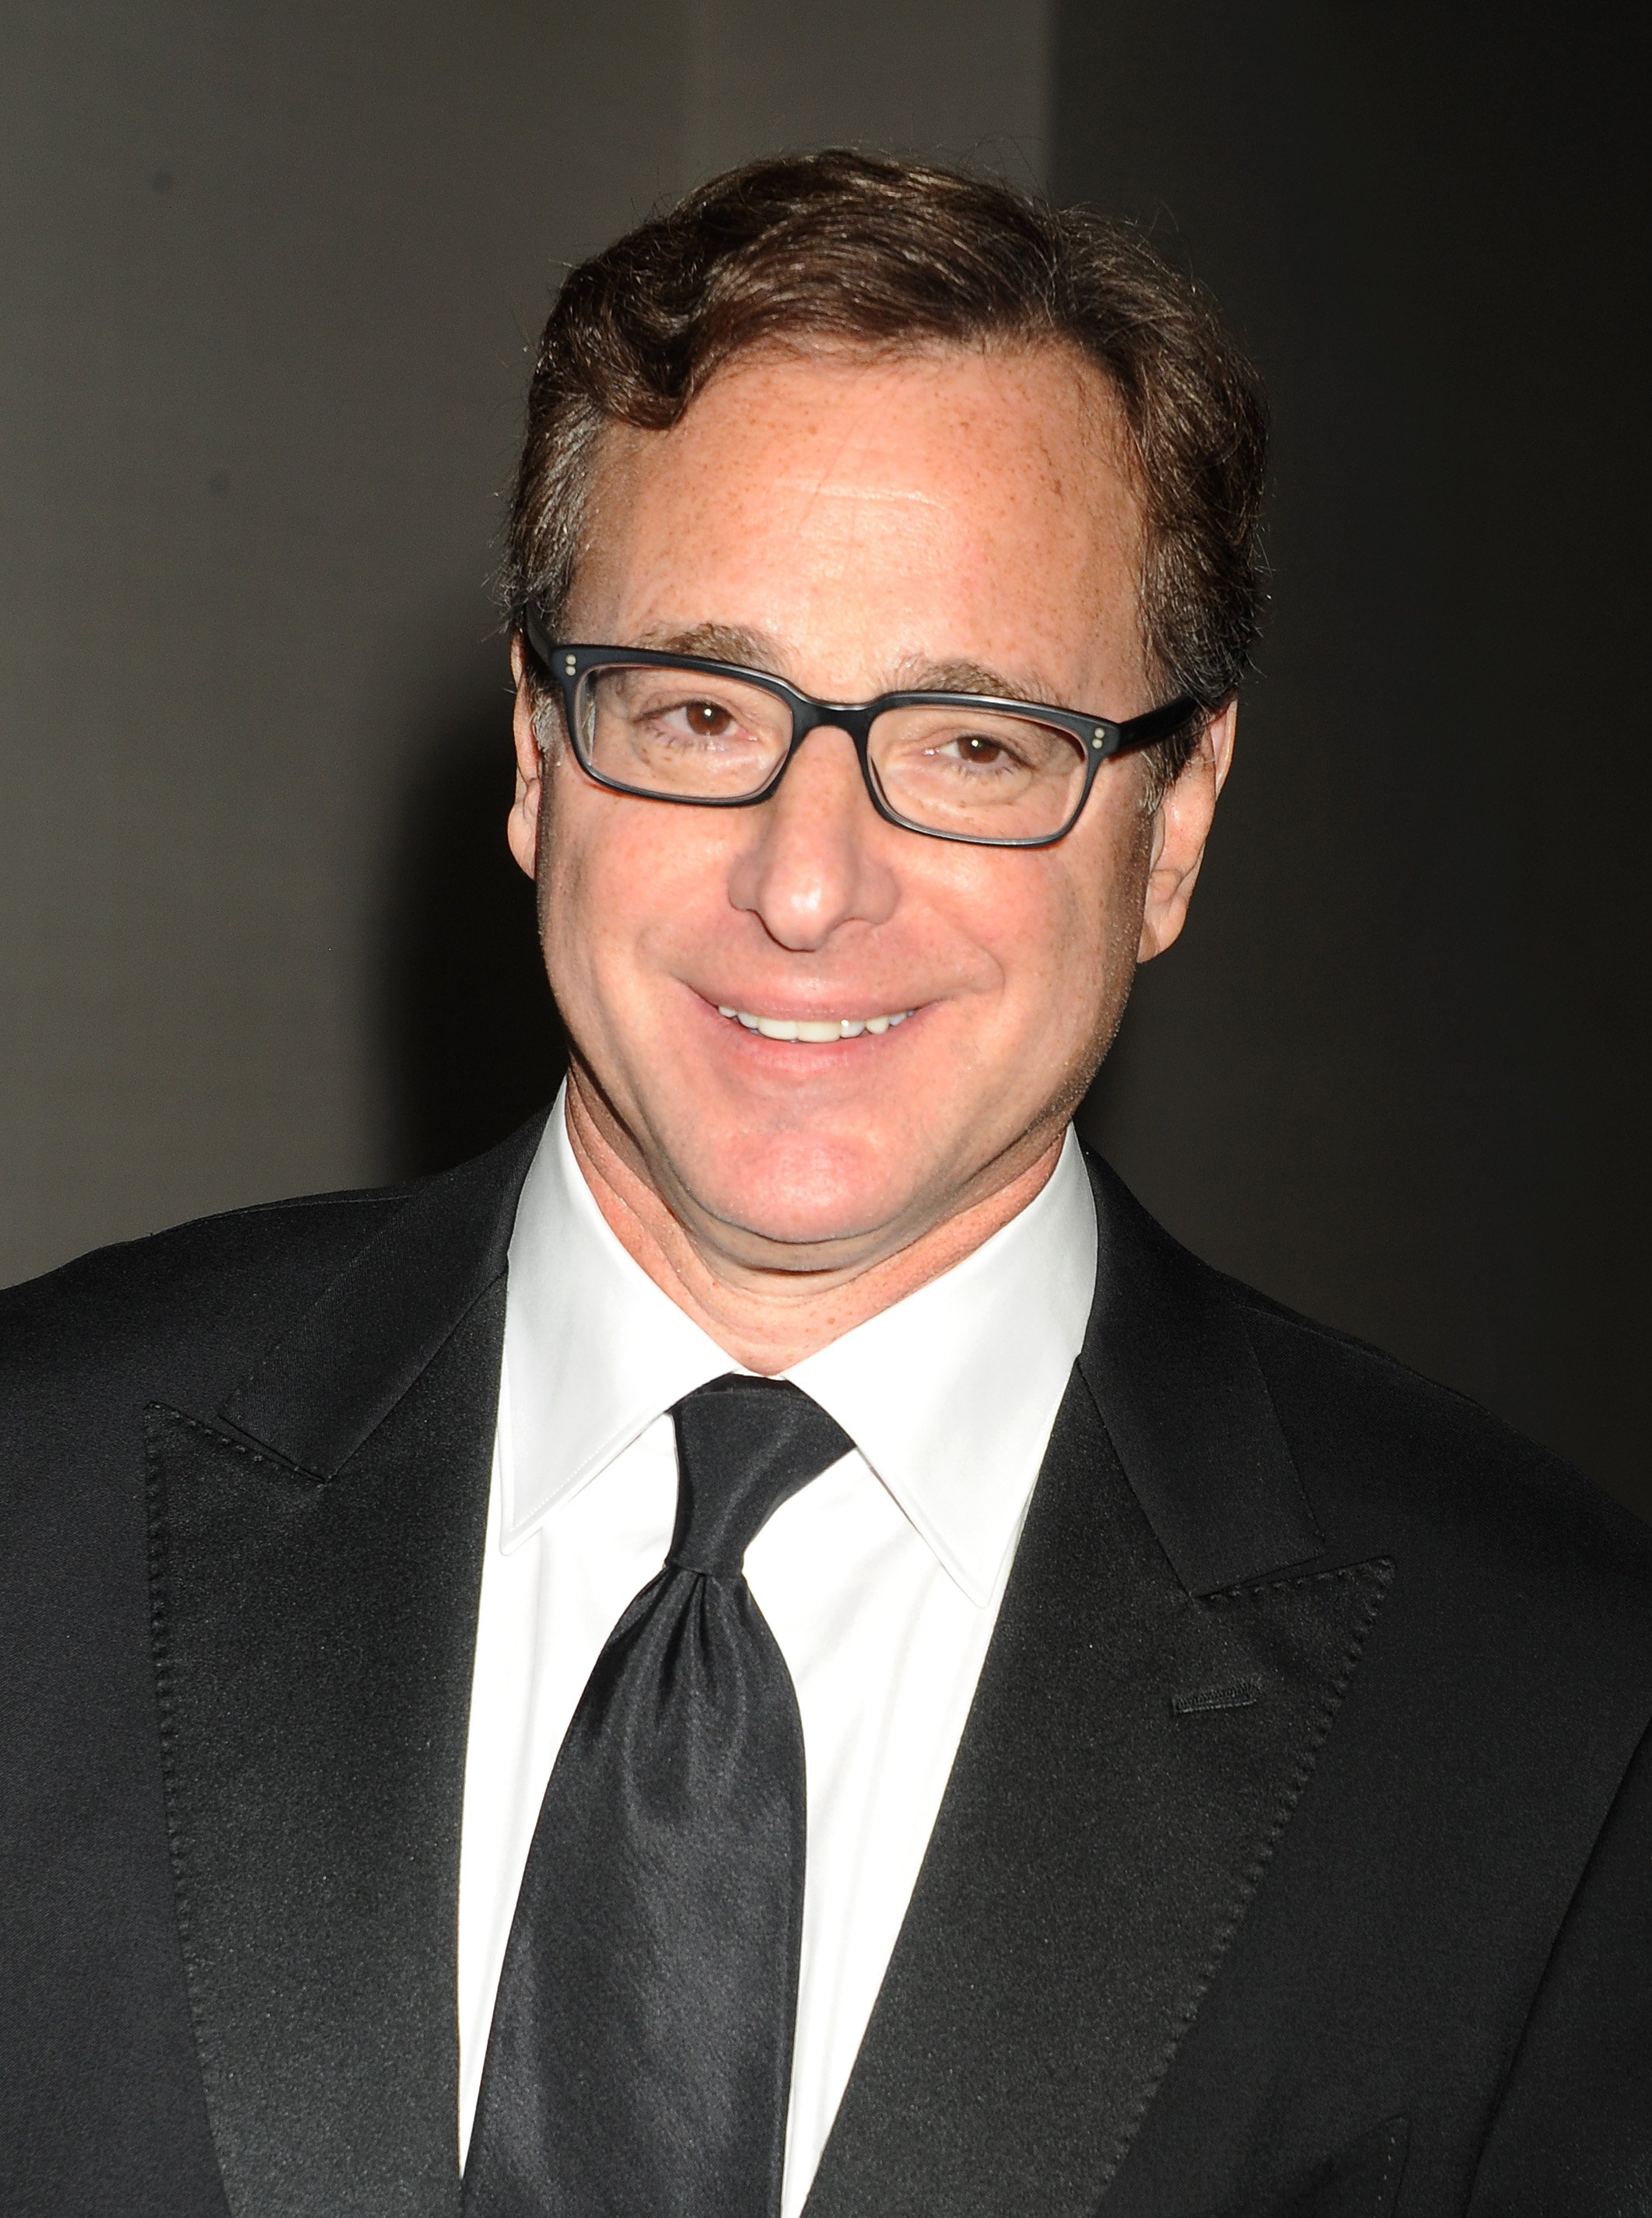 Bob Saget poses during the 2015 Writers Guild Awards L.A. Ceremony at the Hyatt Regency Century Plaza on February 14, 2015 in Century City, California | Source: Getty Images 